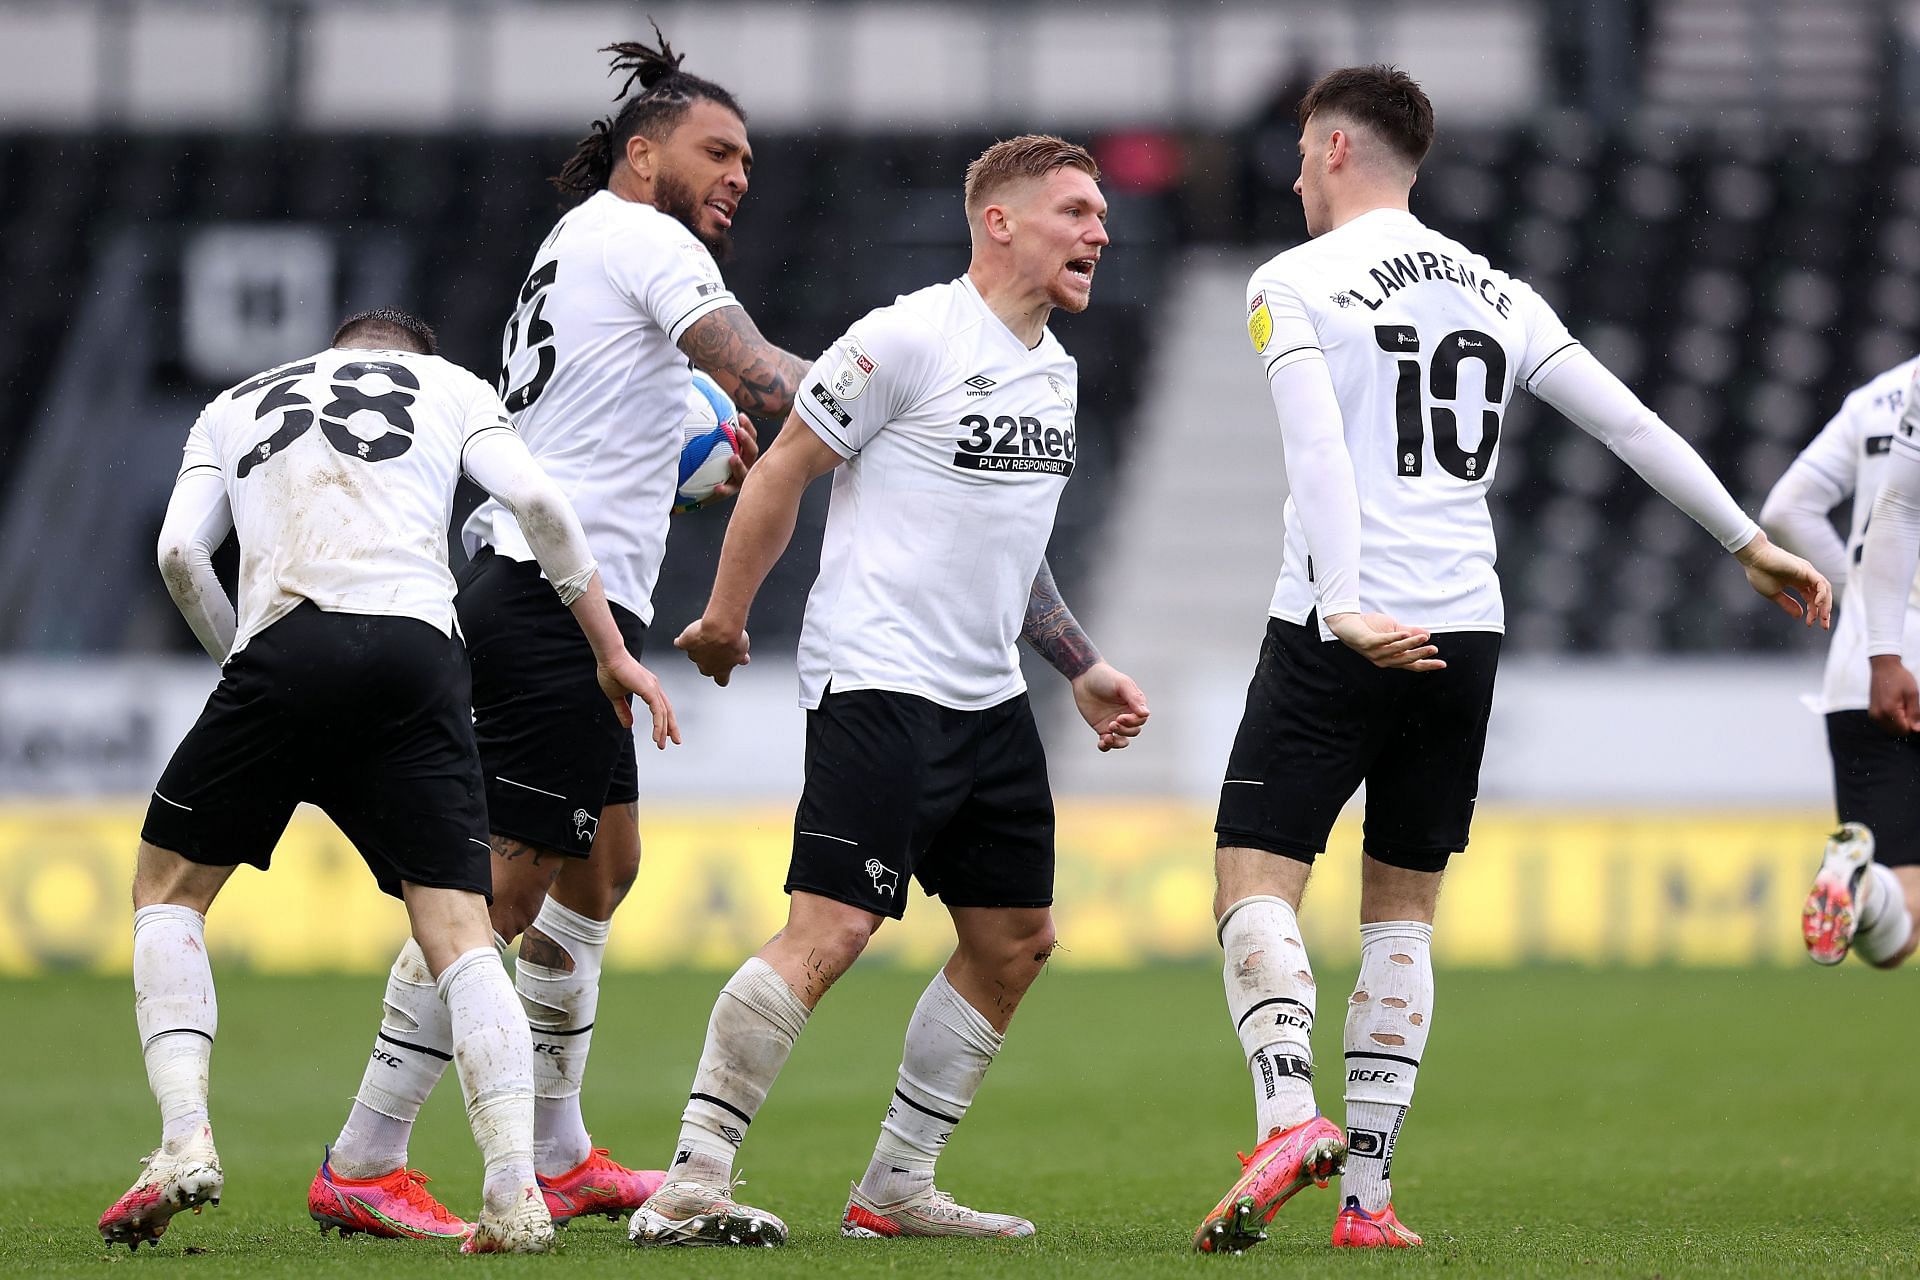 Derby County will host Luton Town on Tuesday